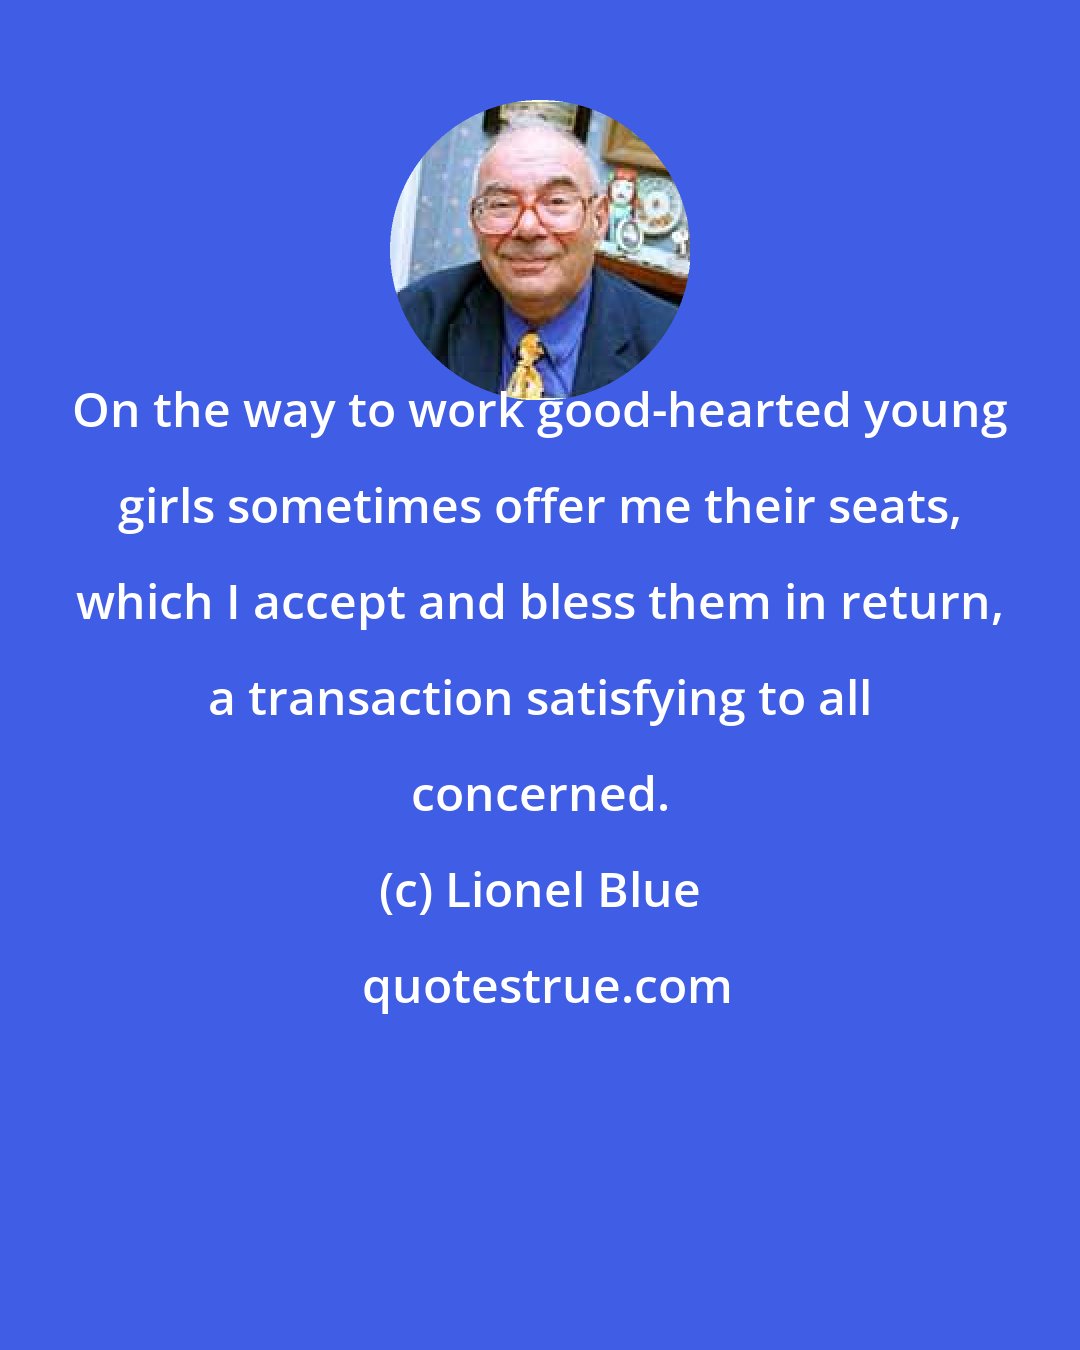 Lionel Blue: On the way to work good-hearted young girls sometimes offer me their seats, which I accept and bless them in return, a transaction satisfying to all concerned.